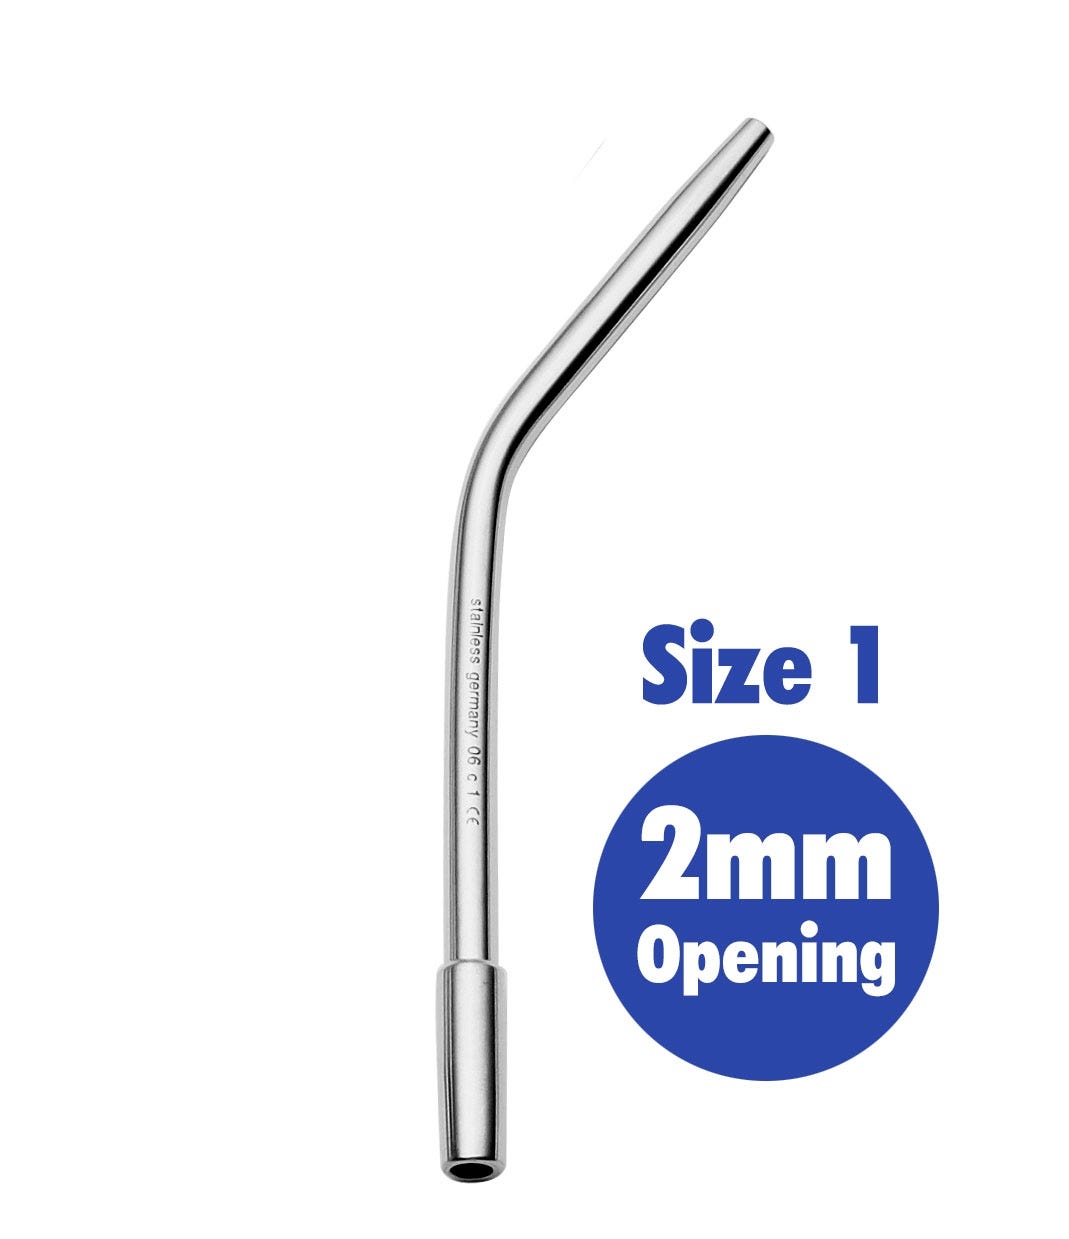 ACE Oral Surgery Suction Tip, size 1, 2mm opening